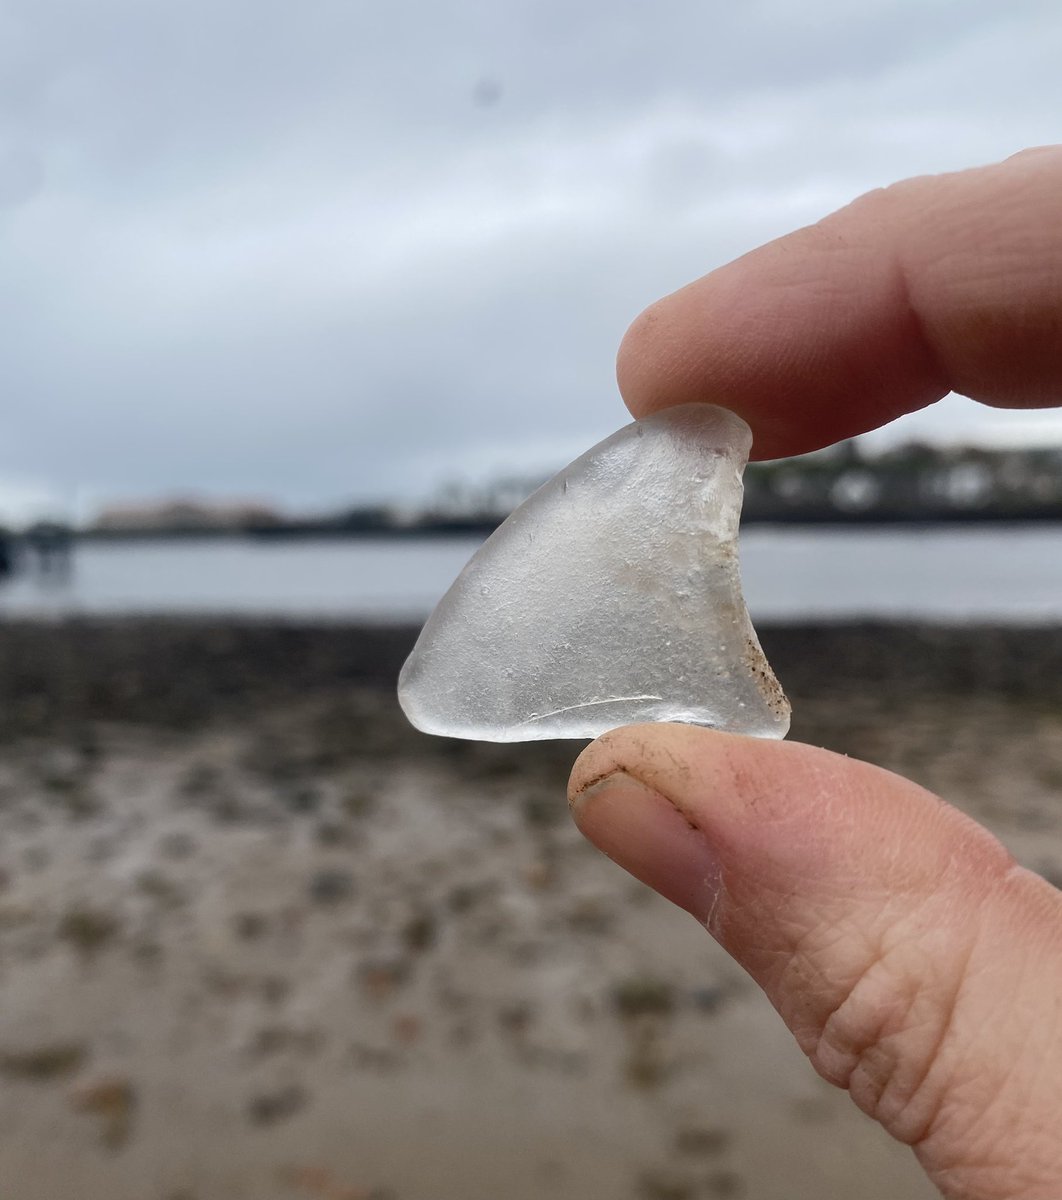 Anyone else see a dolphin dorsal fin on this gorgeous piece of seaglass I spotted? 🐬 

#dolphin #cetacean #dorsalfin #seaglass #beachcombing #northshieldsfishquay #northshields #northtyneside